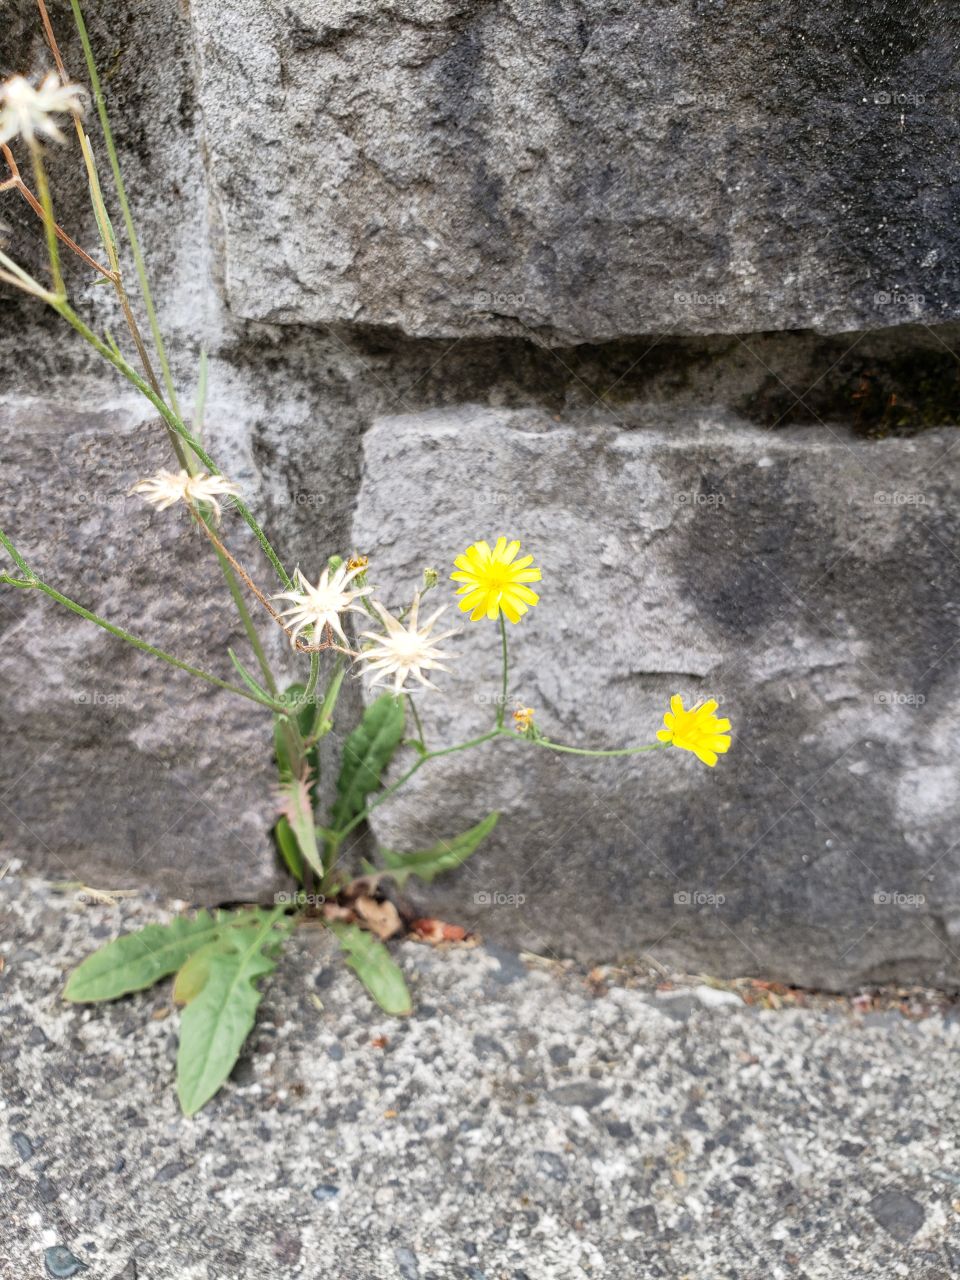 Flowers and brick